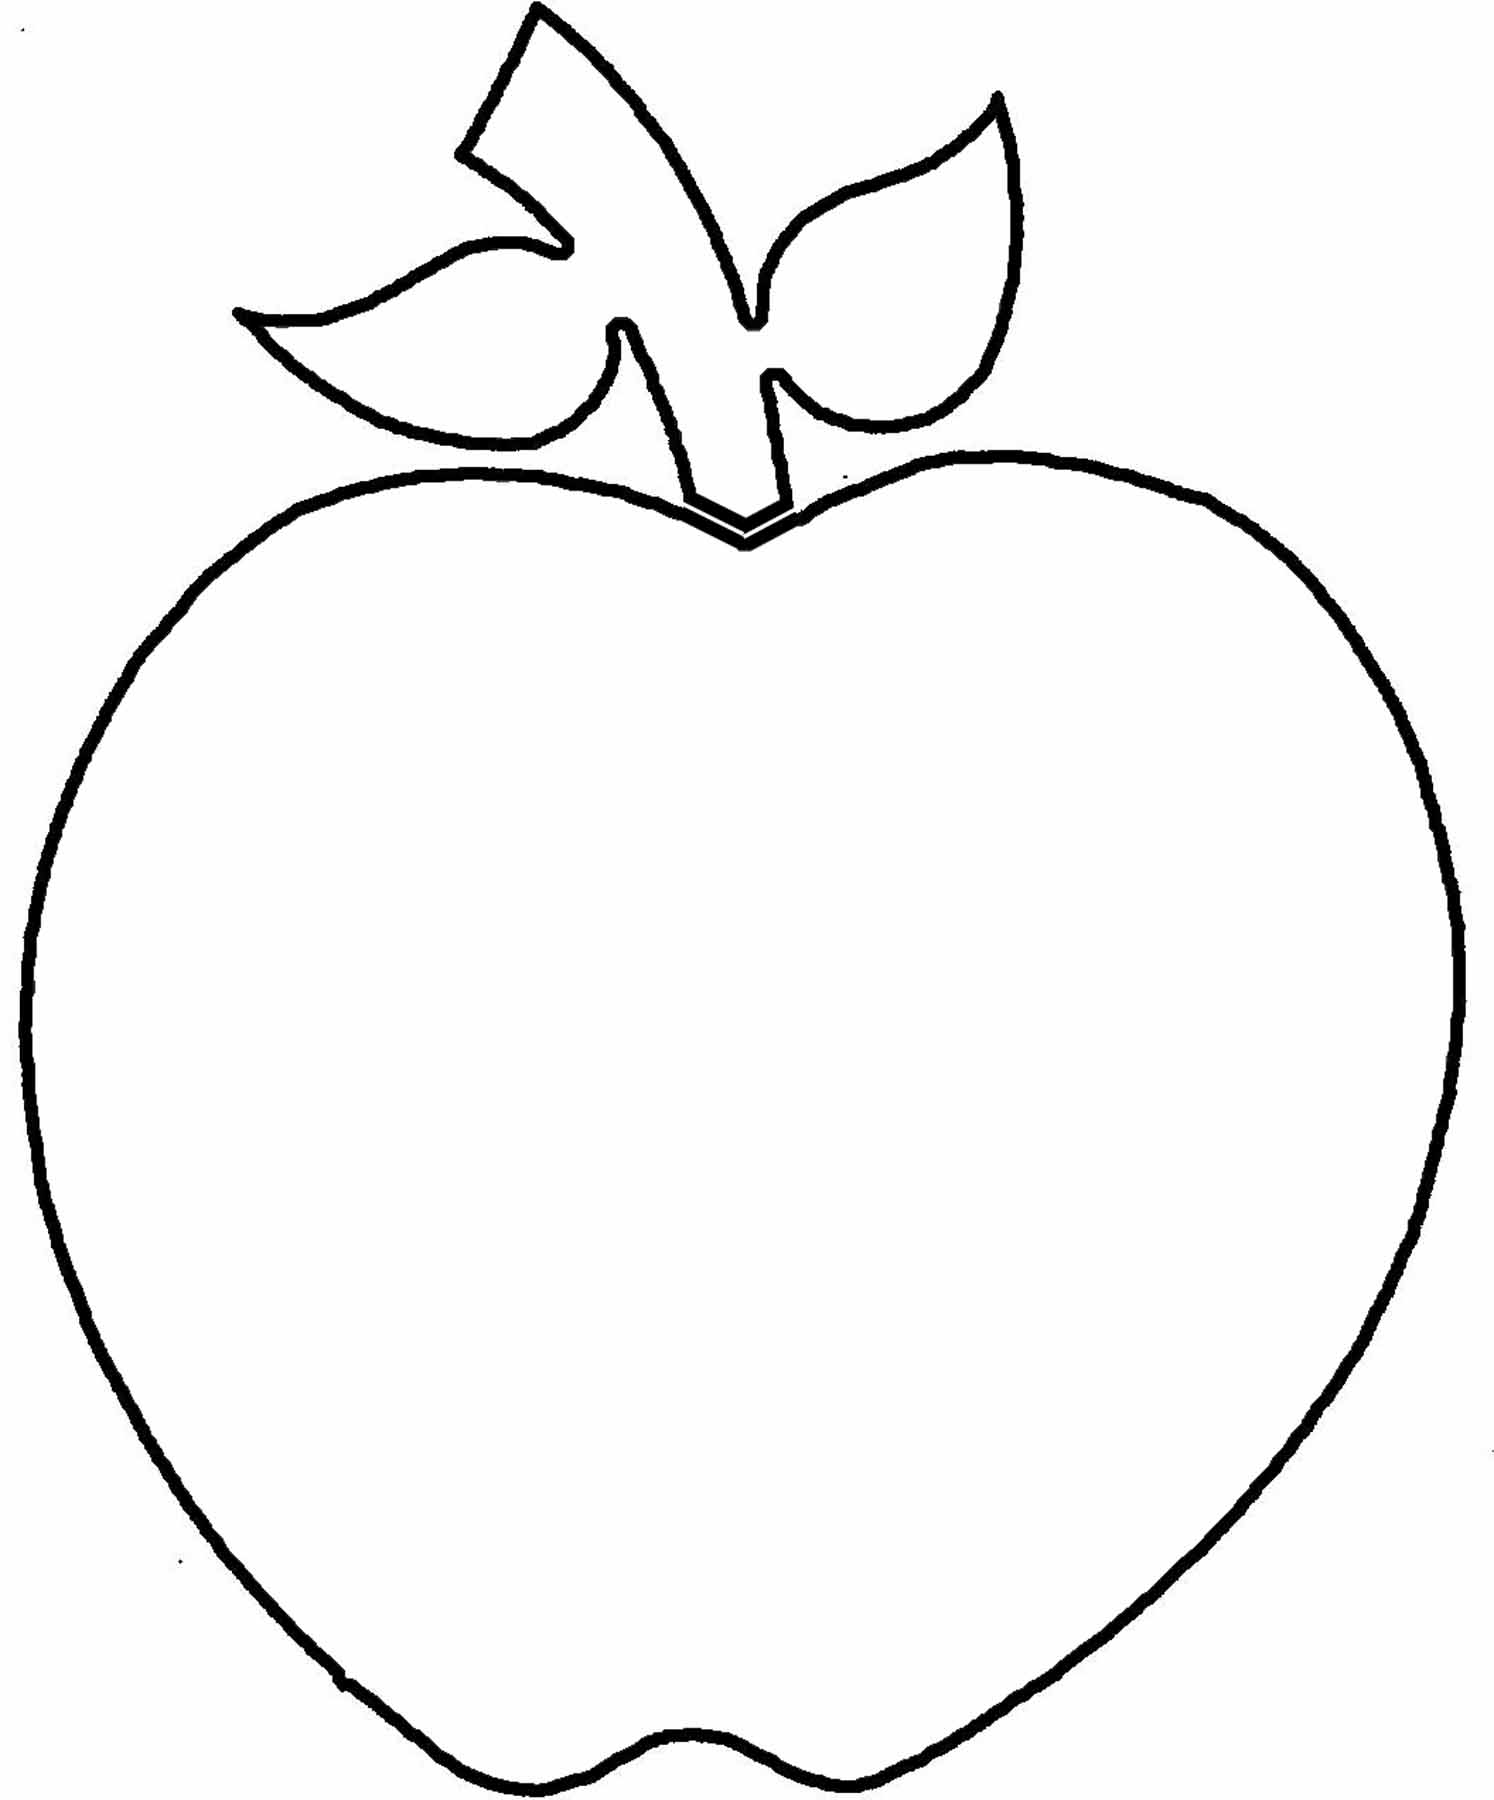 Images For > Apple Vector Outline